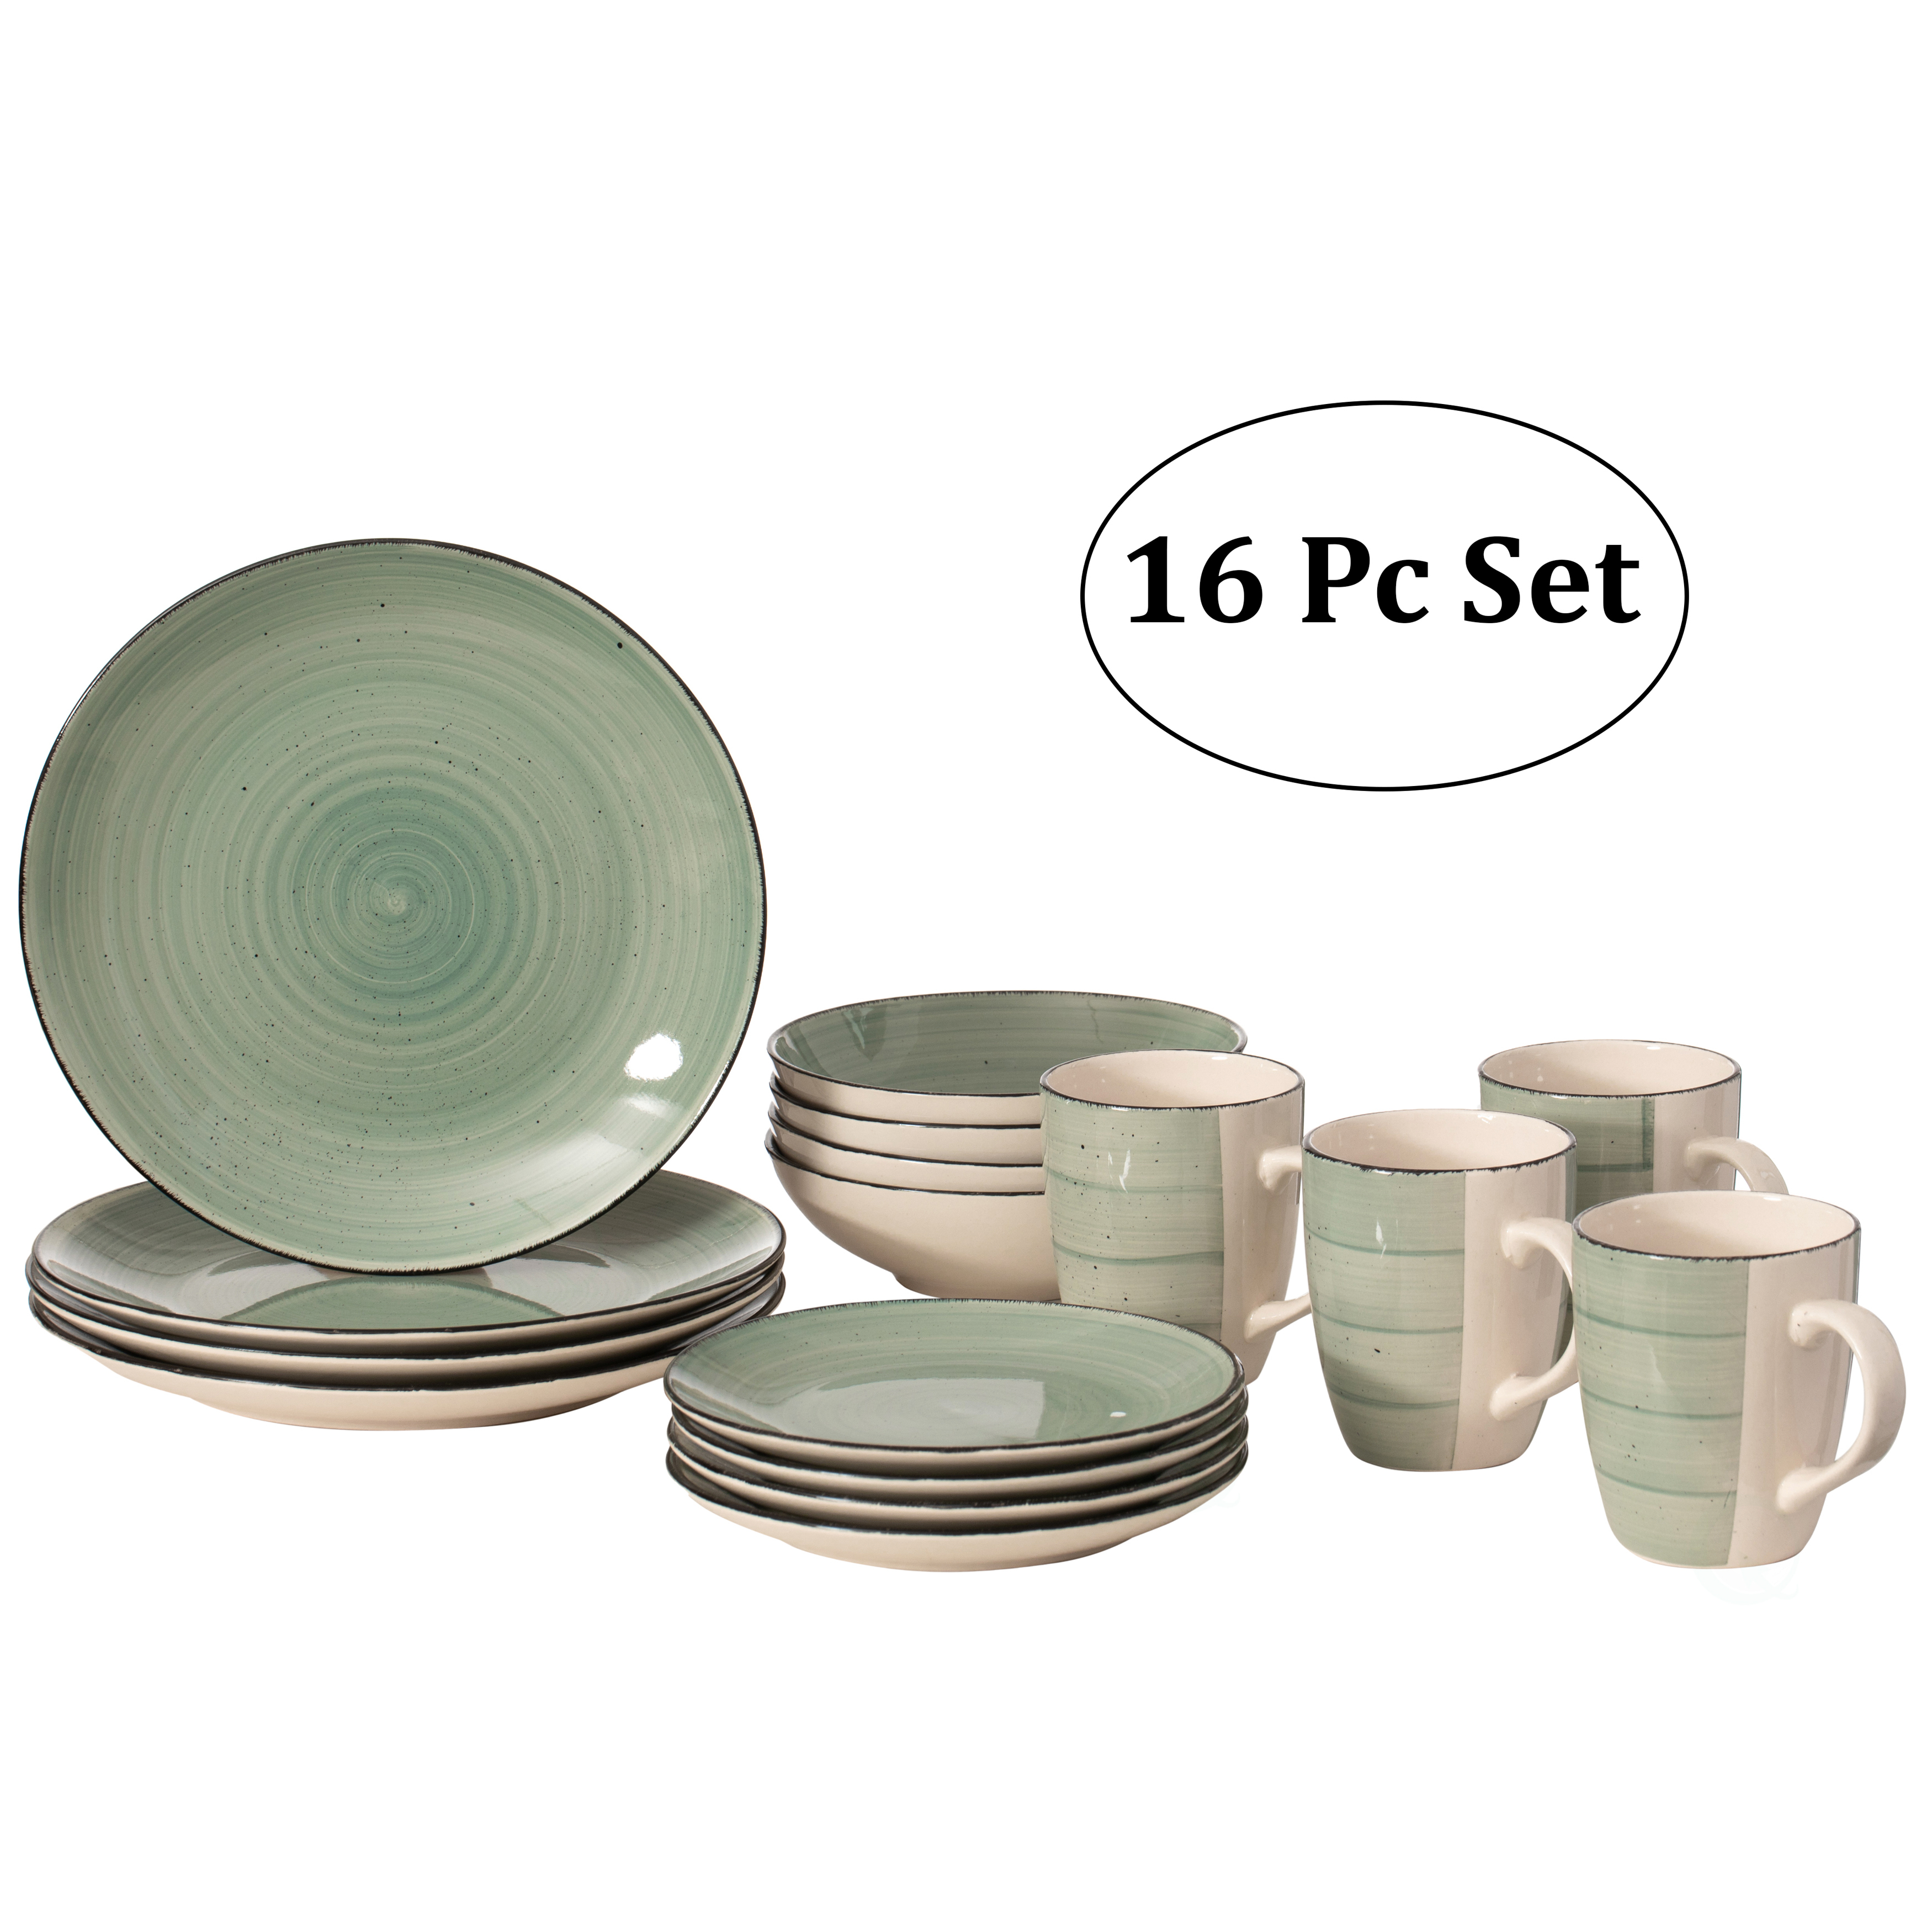 16 PC Spin Wash Dinnerware Dish Set For 4 Person Mugs, Salad And Dinner Plates And Bowls Sets, Dishwasher And Microwave Safe - Black